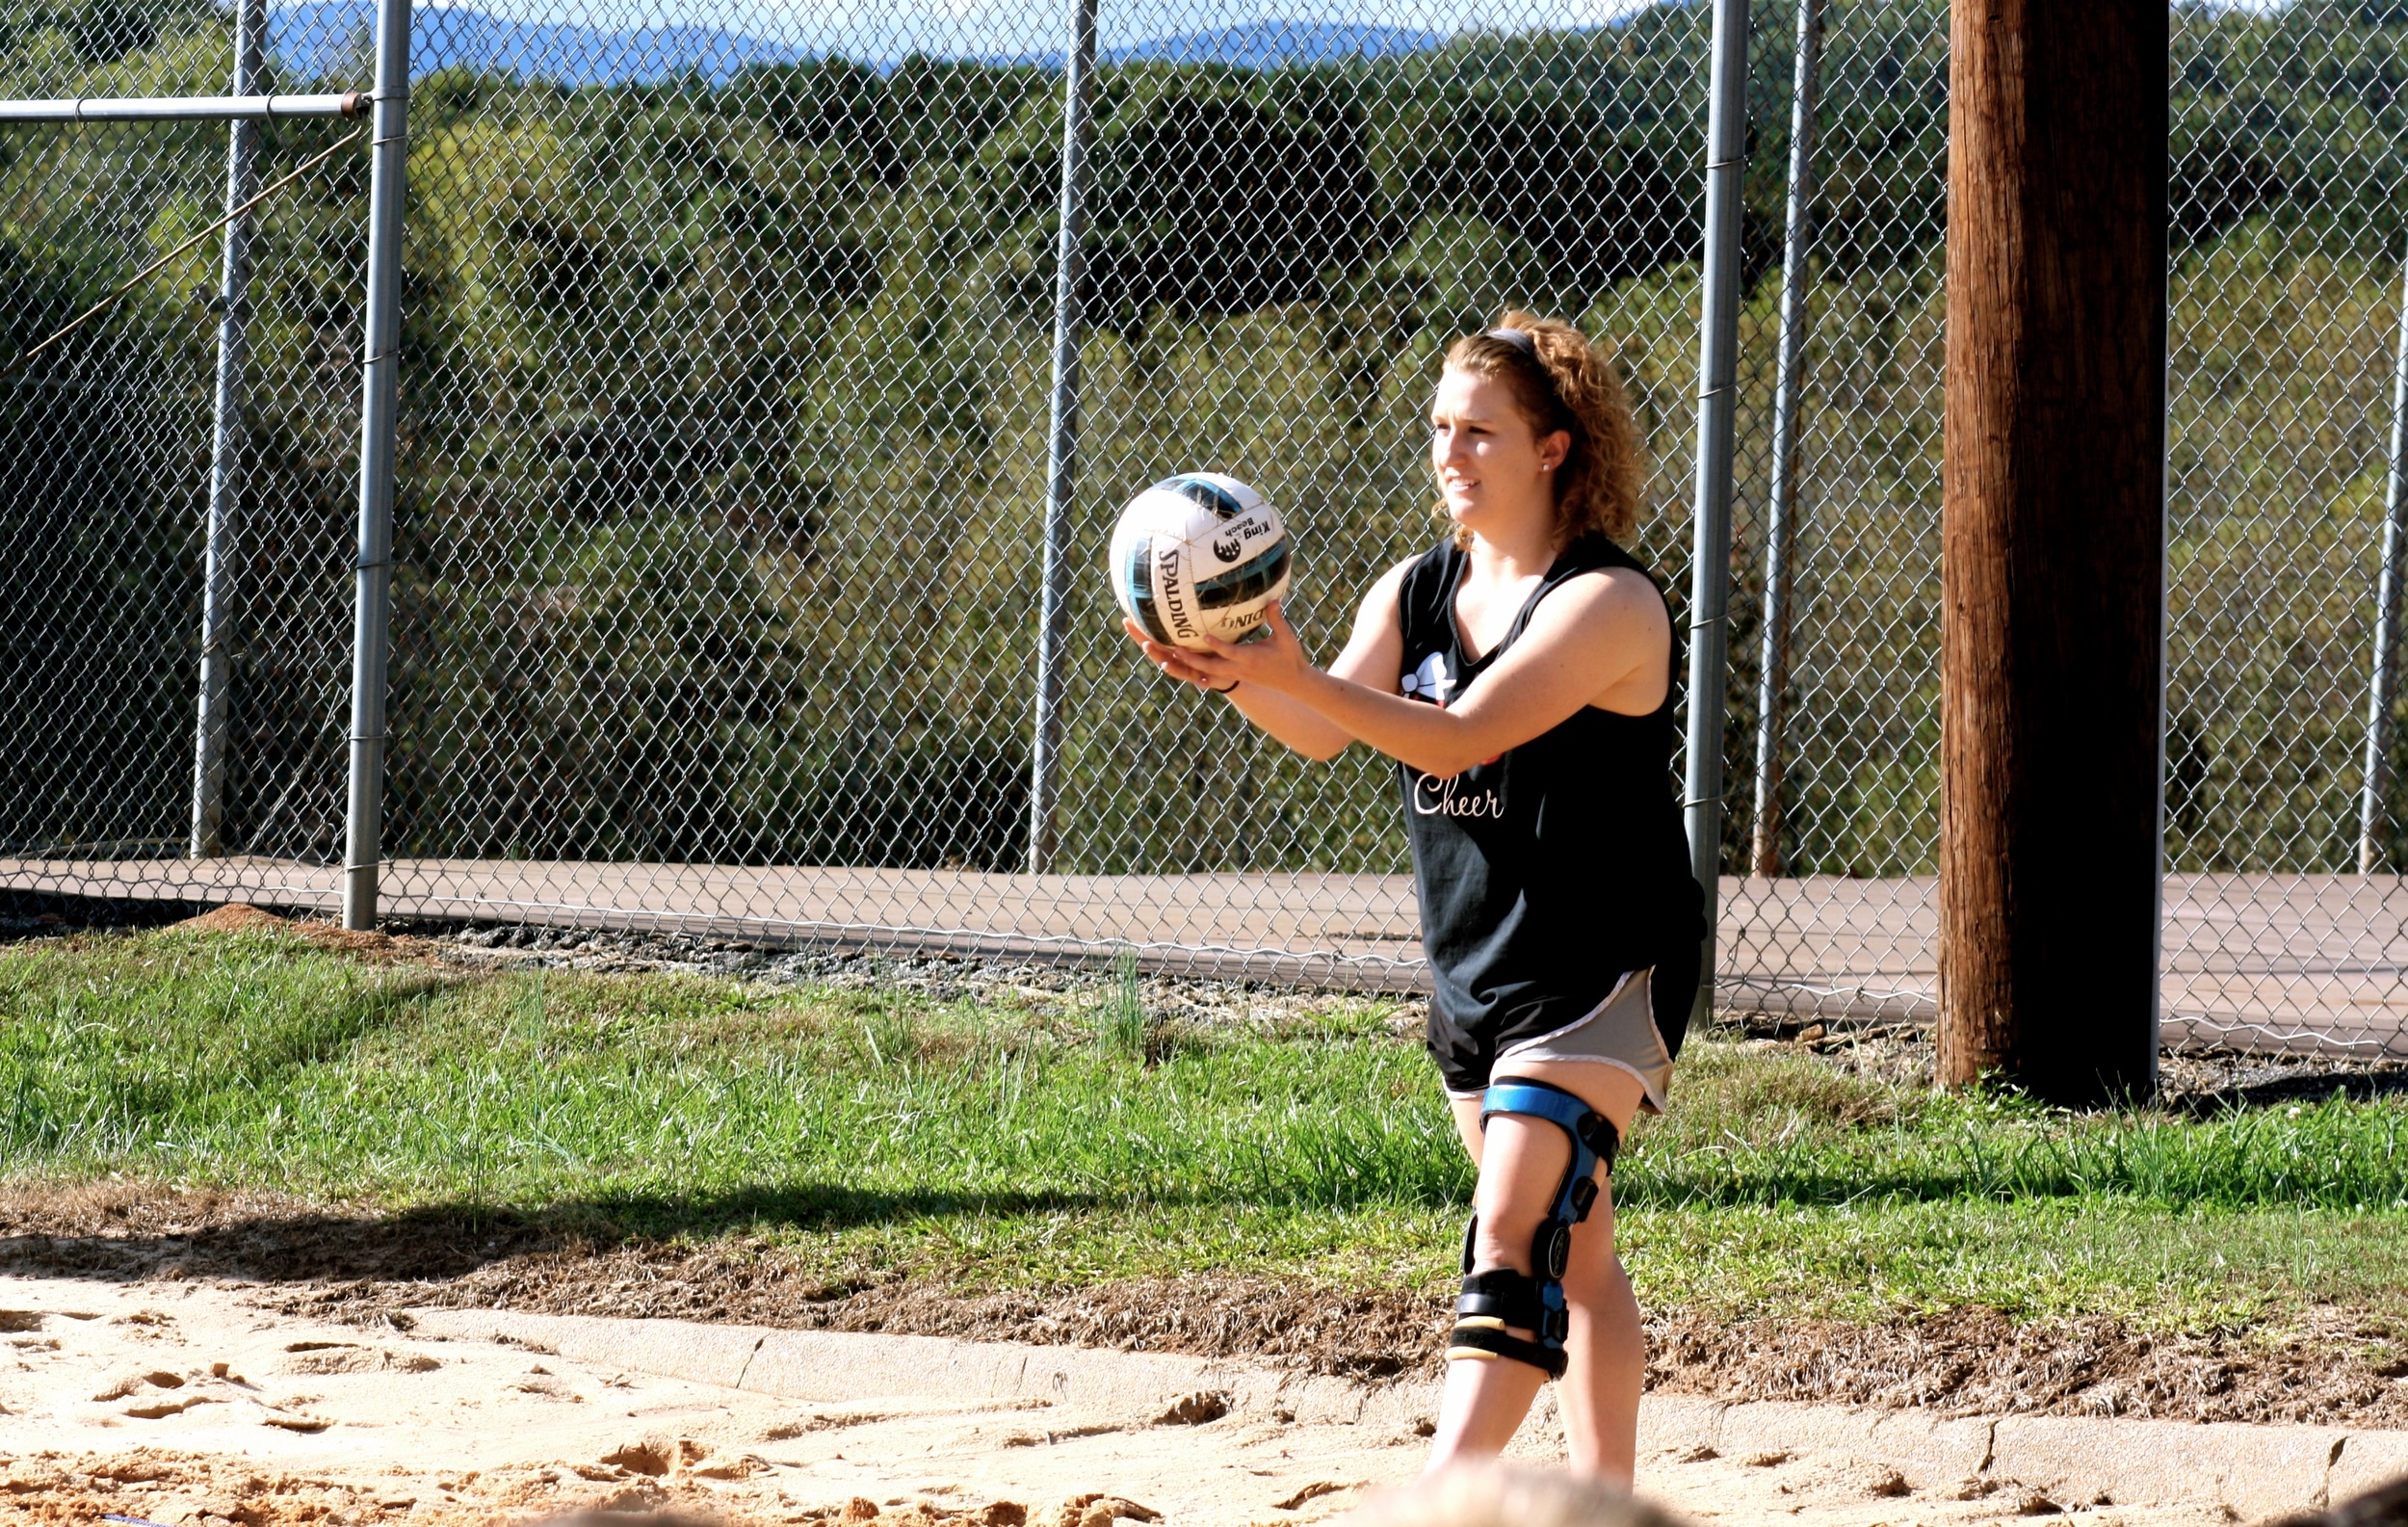  A student prepares to serve the ball. 